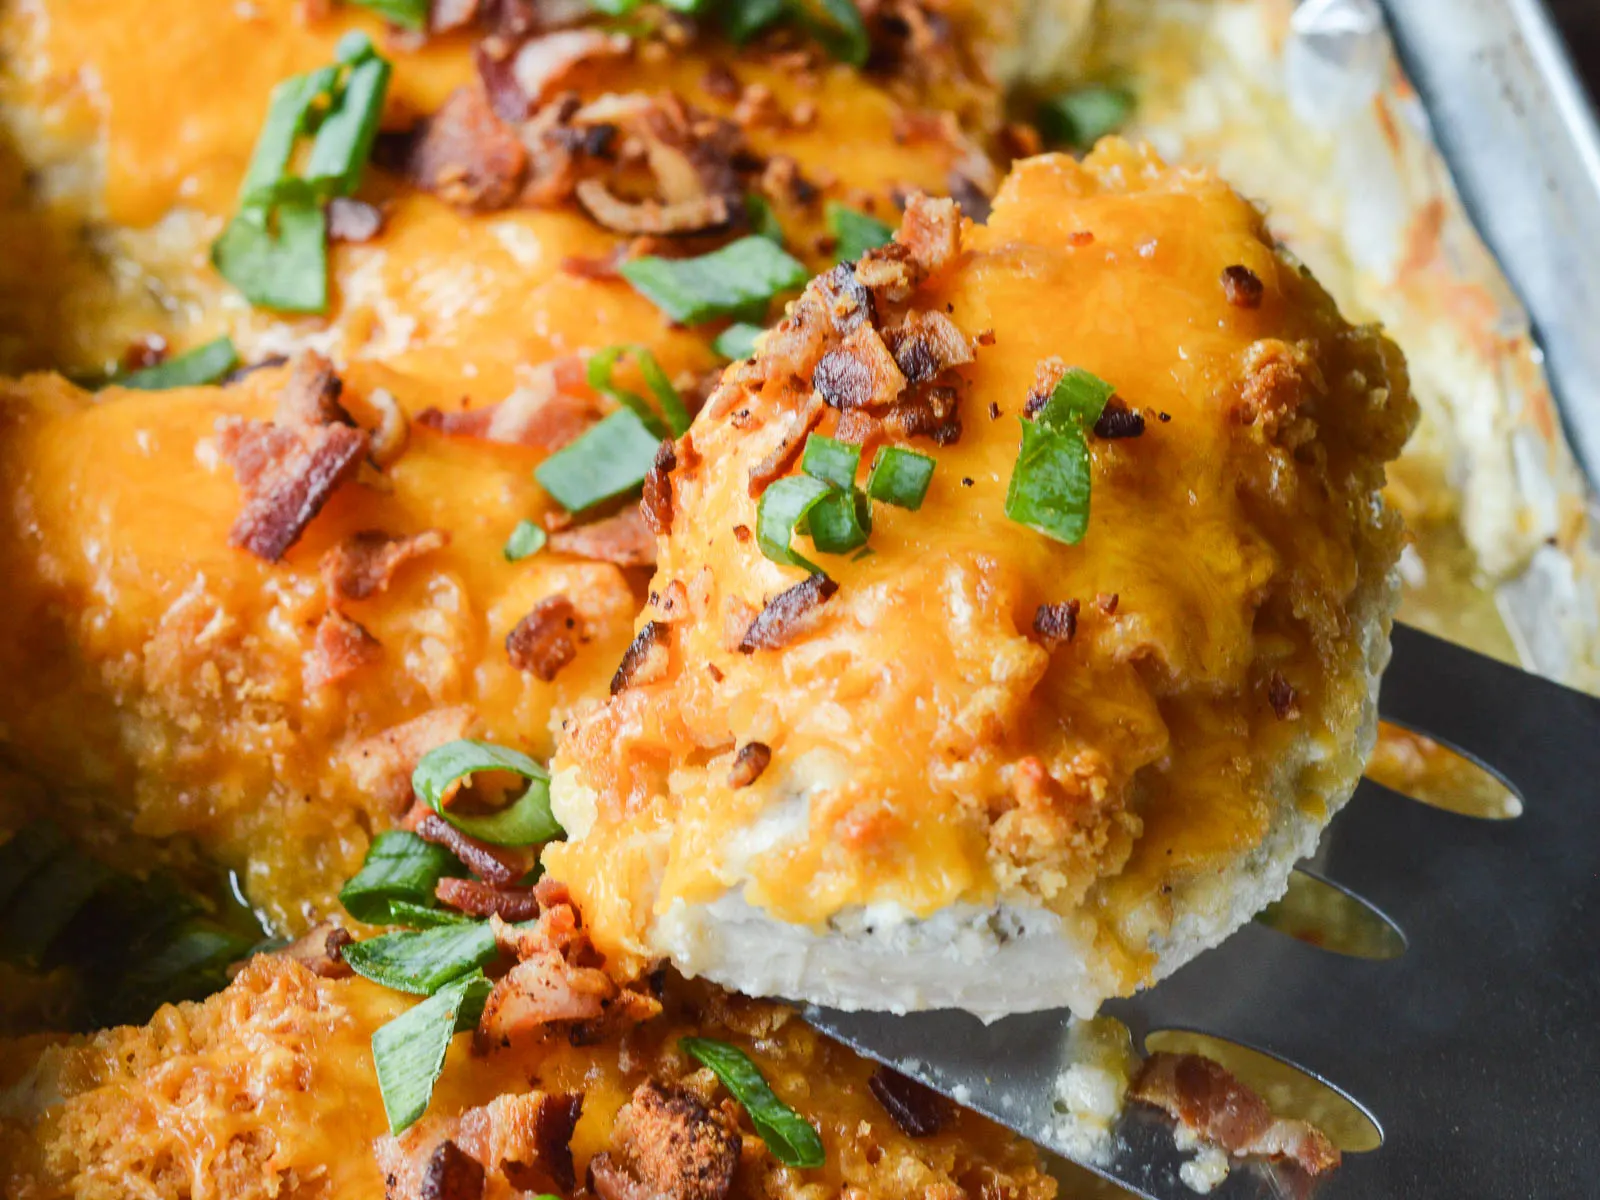 Baked Smothered Cheesy Sour Cream Chicken on a metal spatula being lifted from the hot foil-lined baking pan